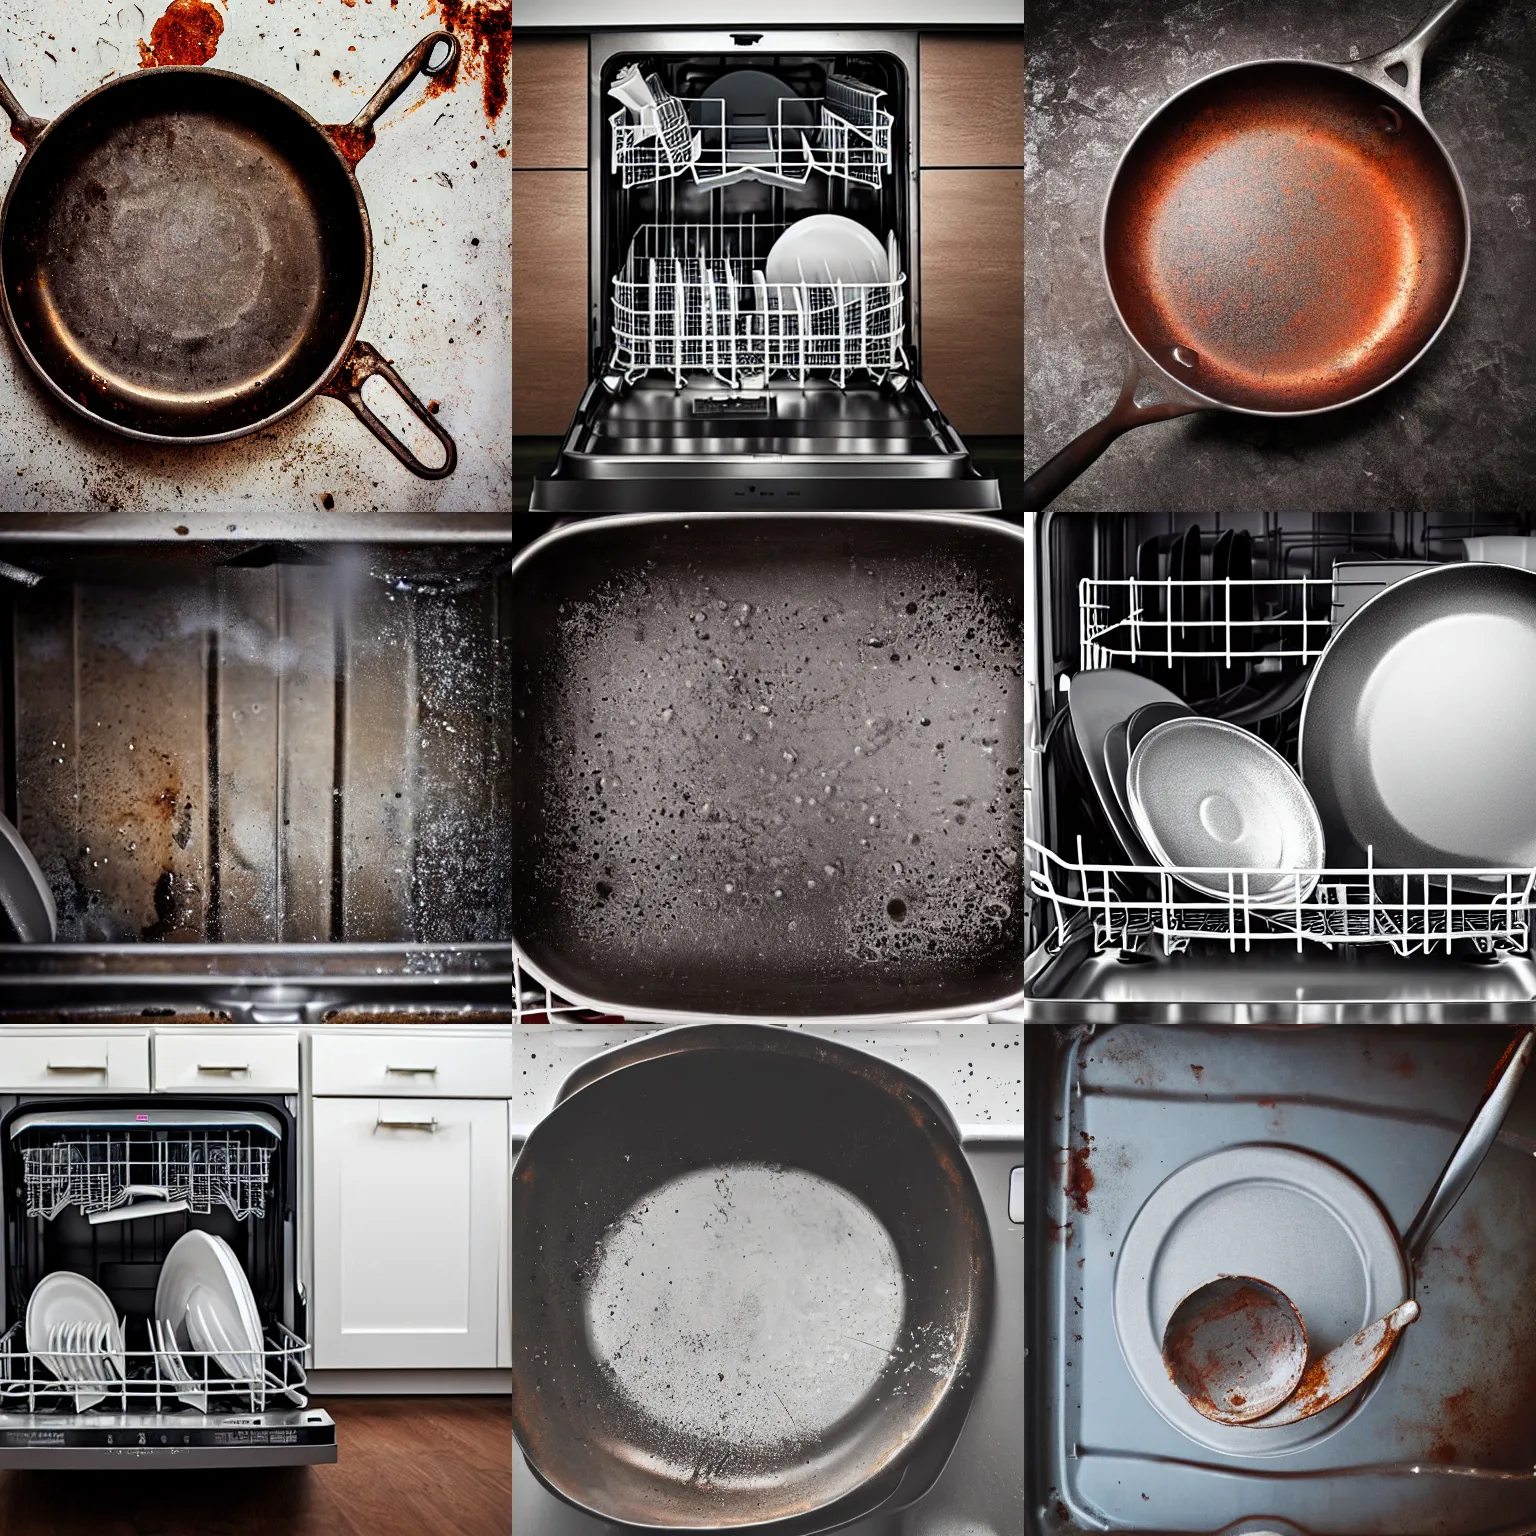 Prompt: Picture of a dishwasher filled with a single very rusty frying pan, professional photography, award winning